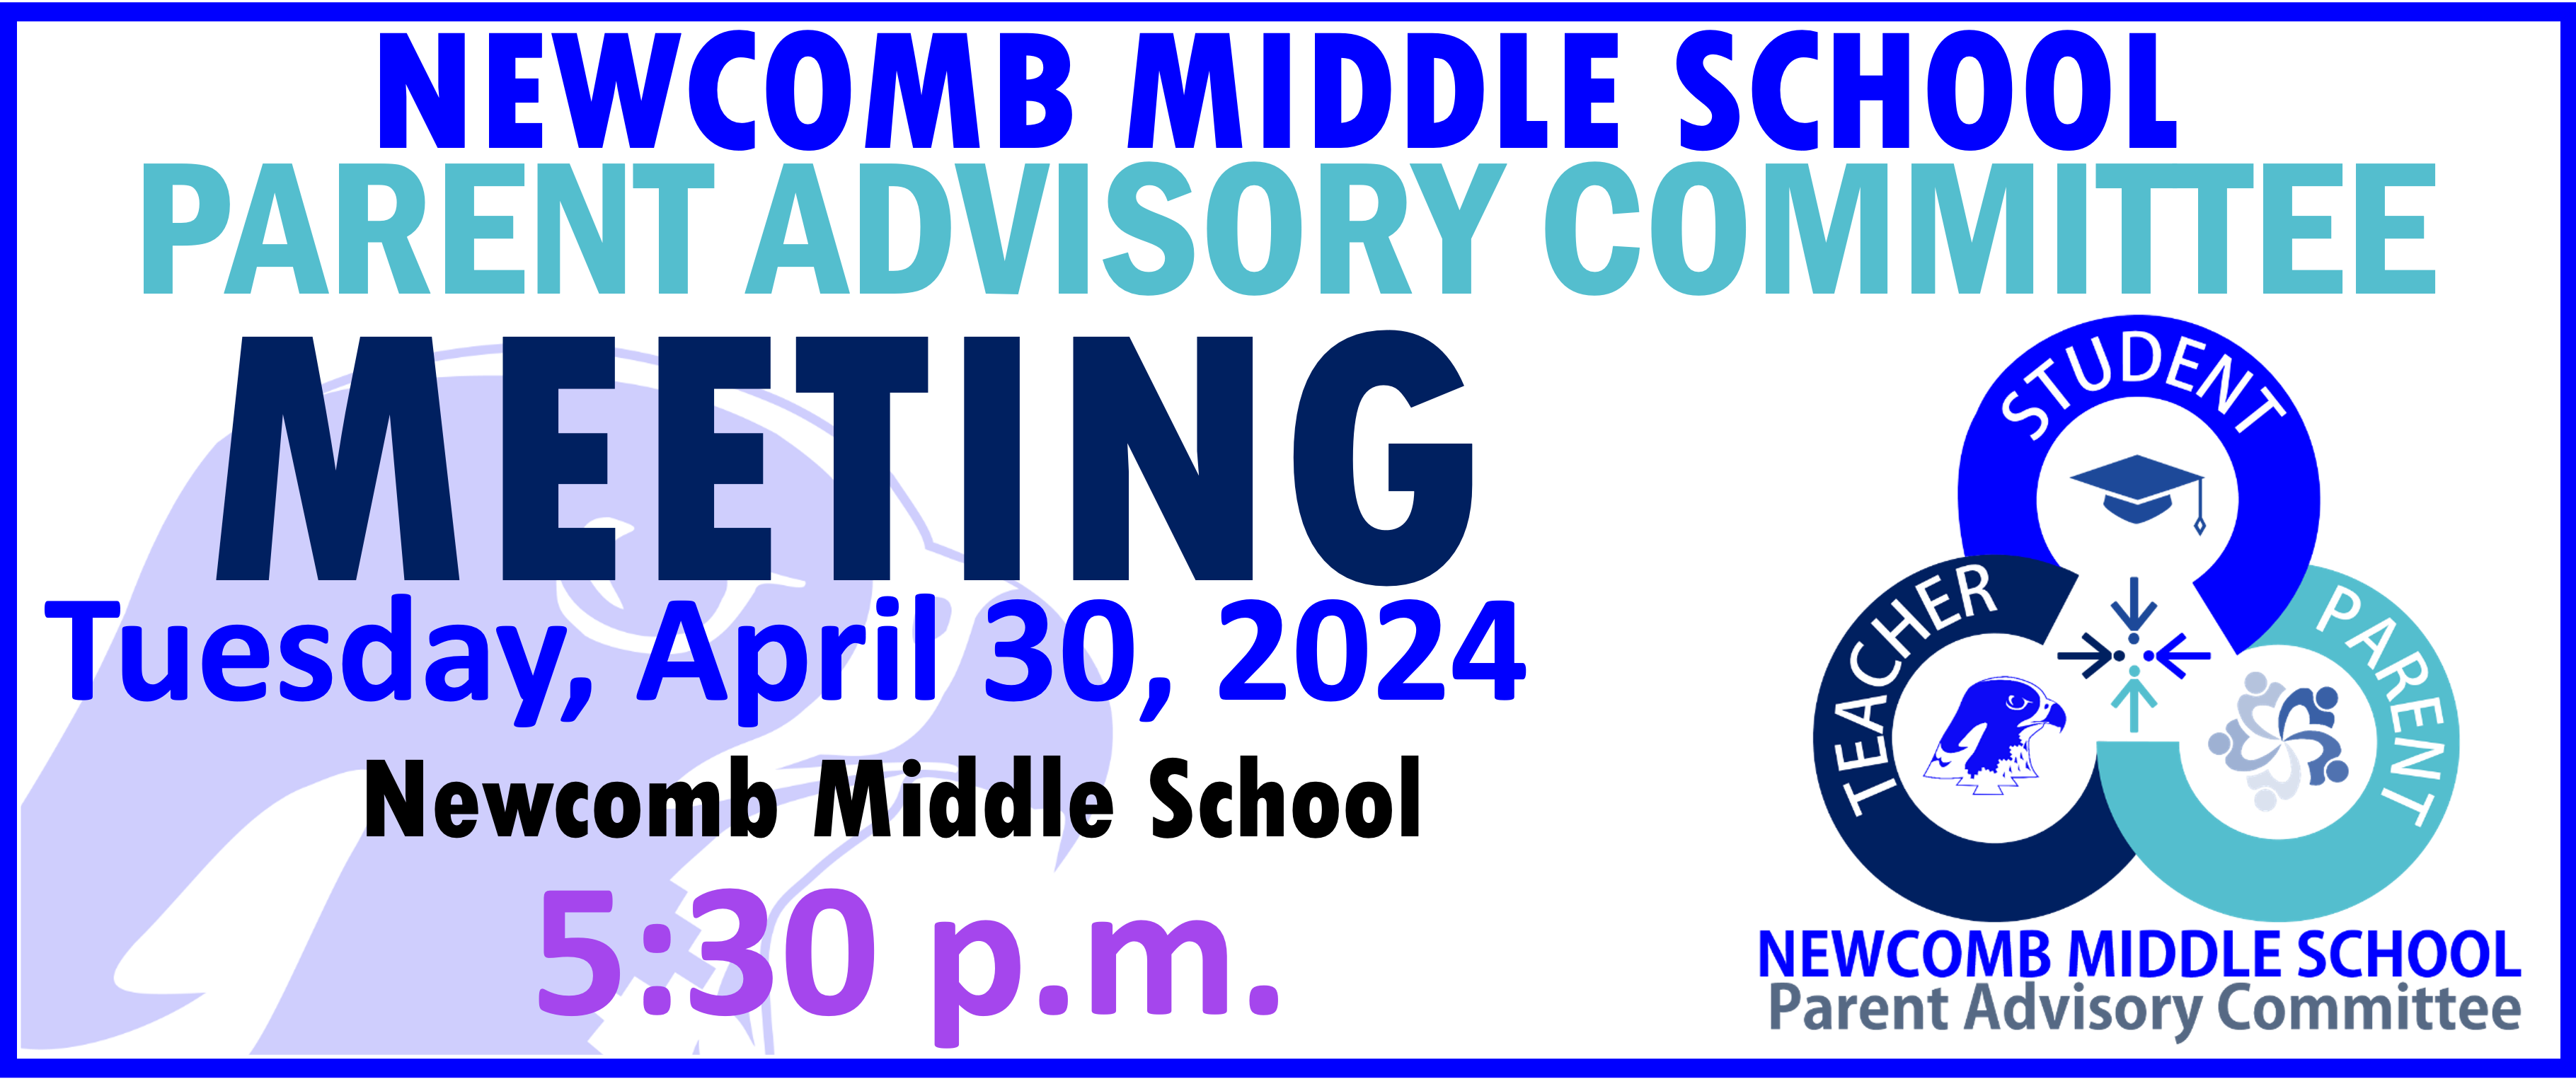 NMS PAC MEETING, Tuesday, April 30, 2024, Time 5:30 p.m.